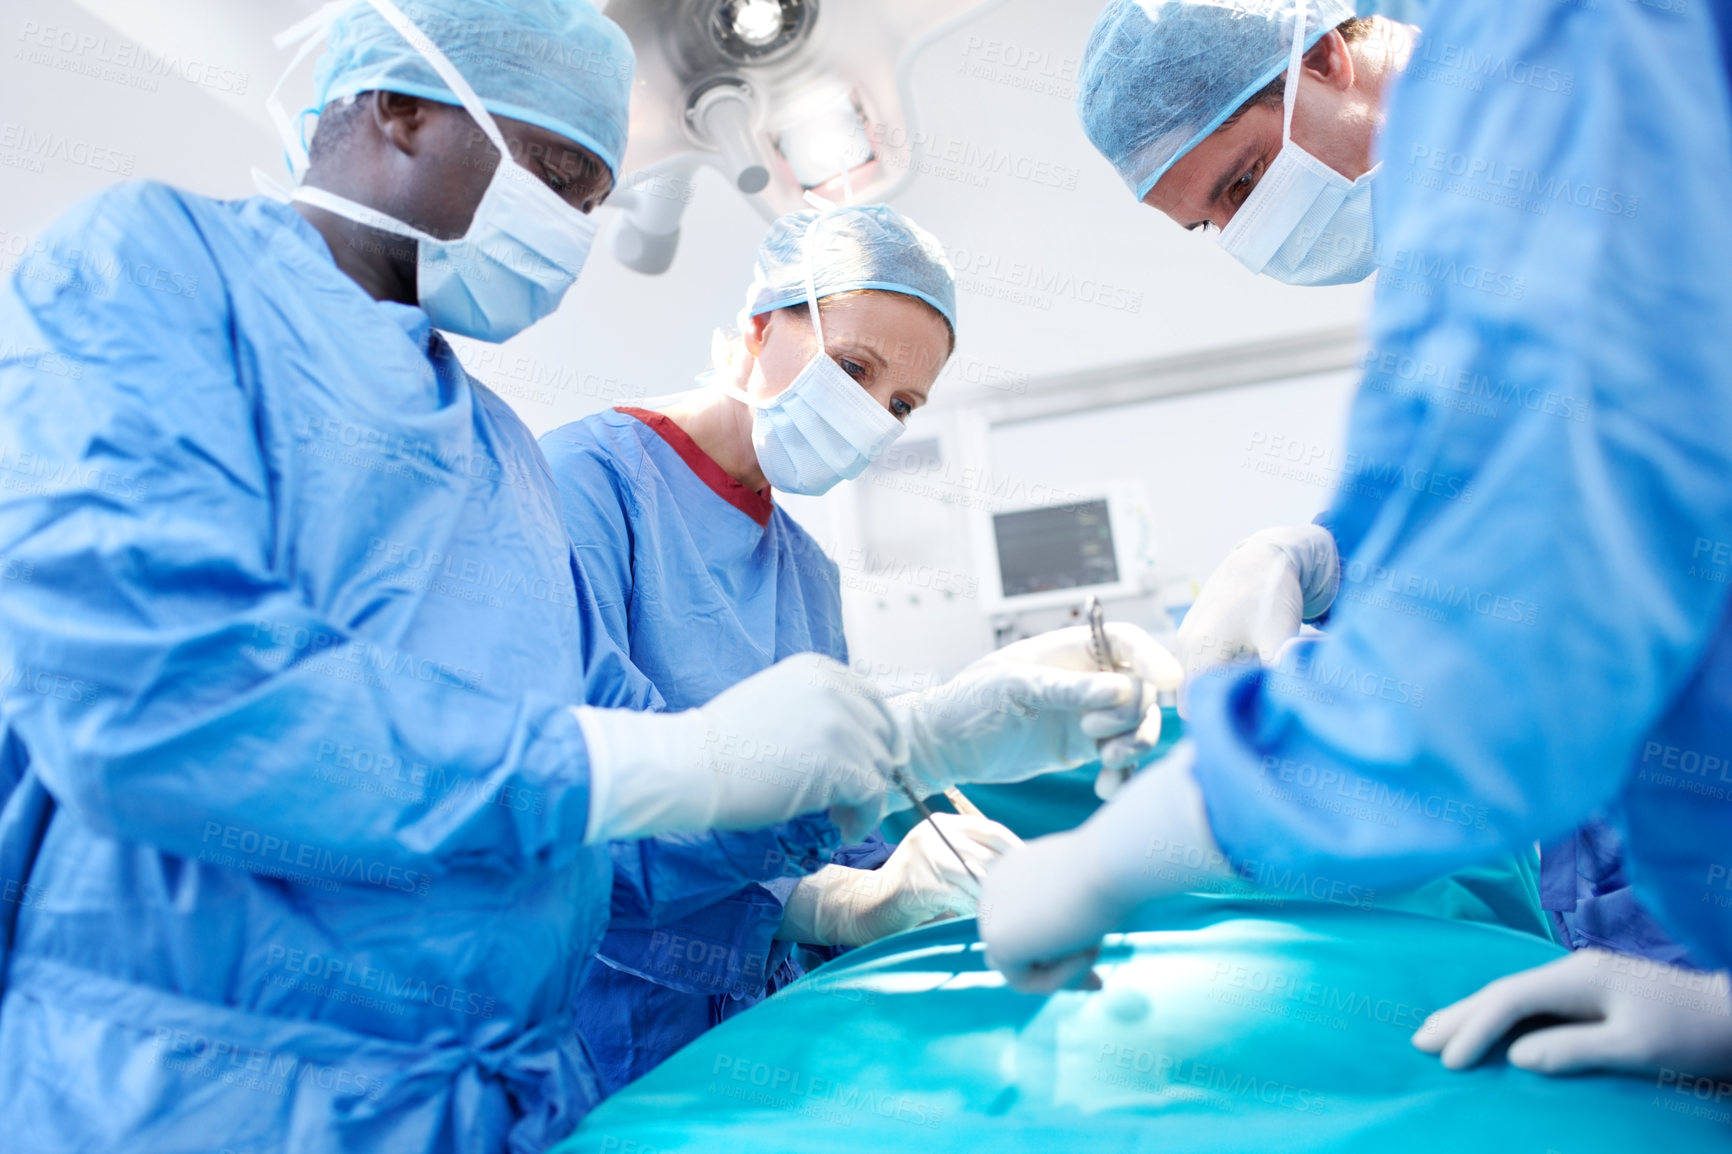 Buy stock photo Surgical doctors wearing scrubs performing surgery in an operating room